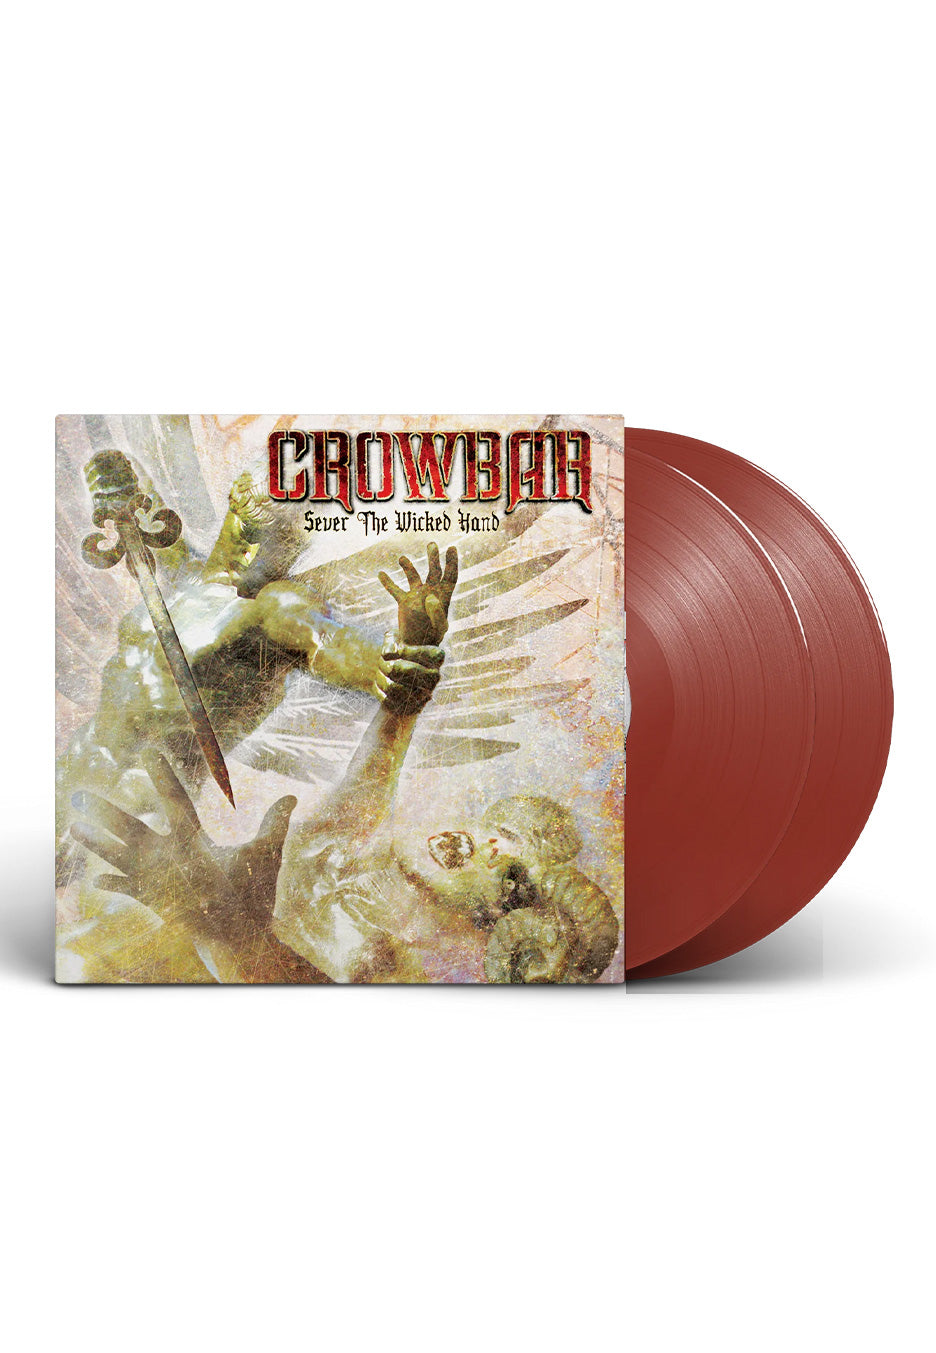 Crowbar - Sever The Wicked Hand Opaque Apple Red - Colored 2 Vinyl